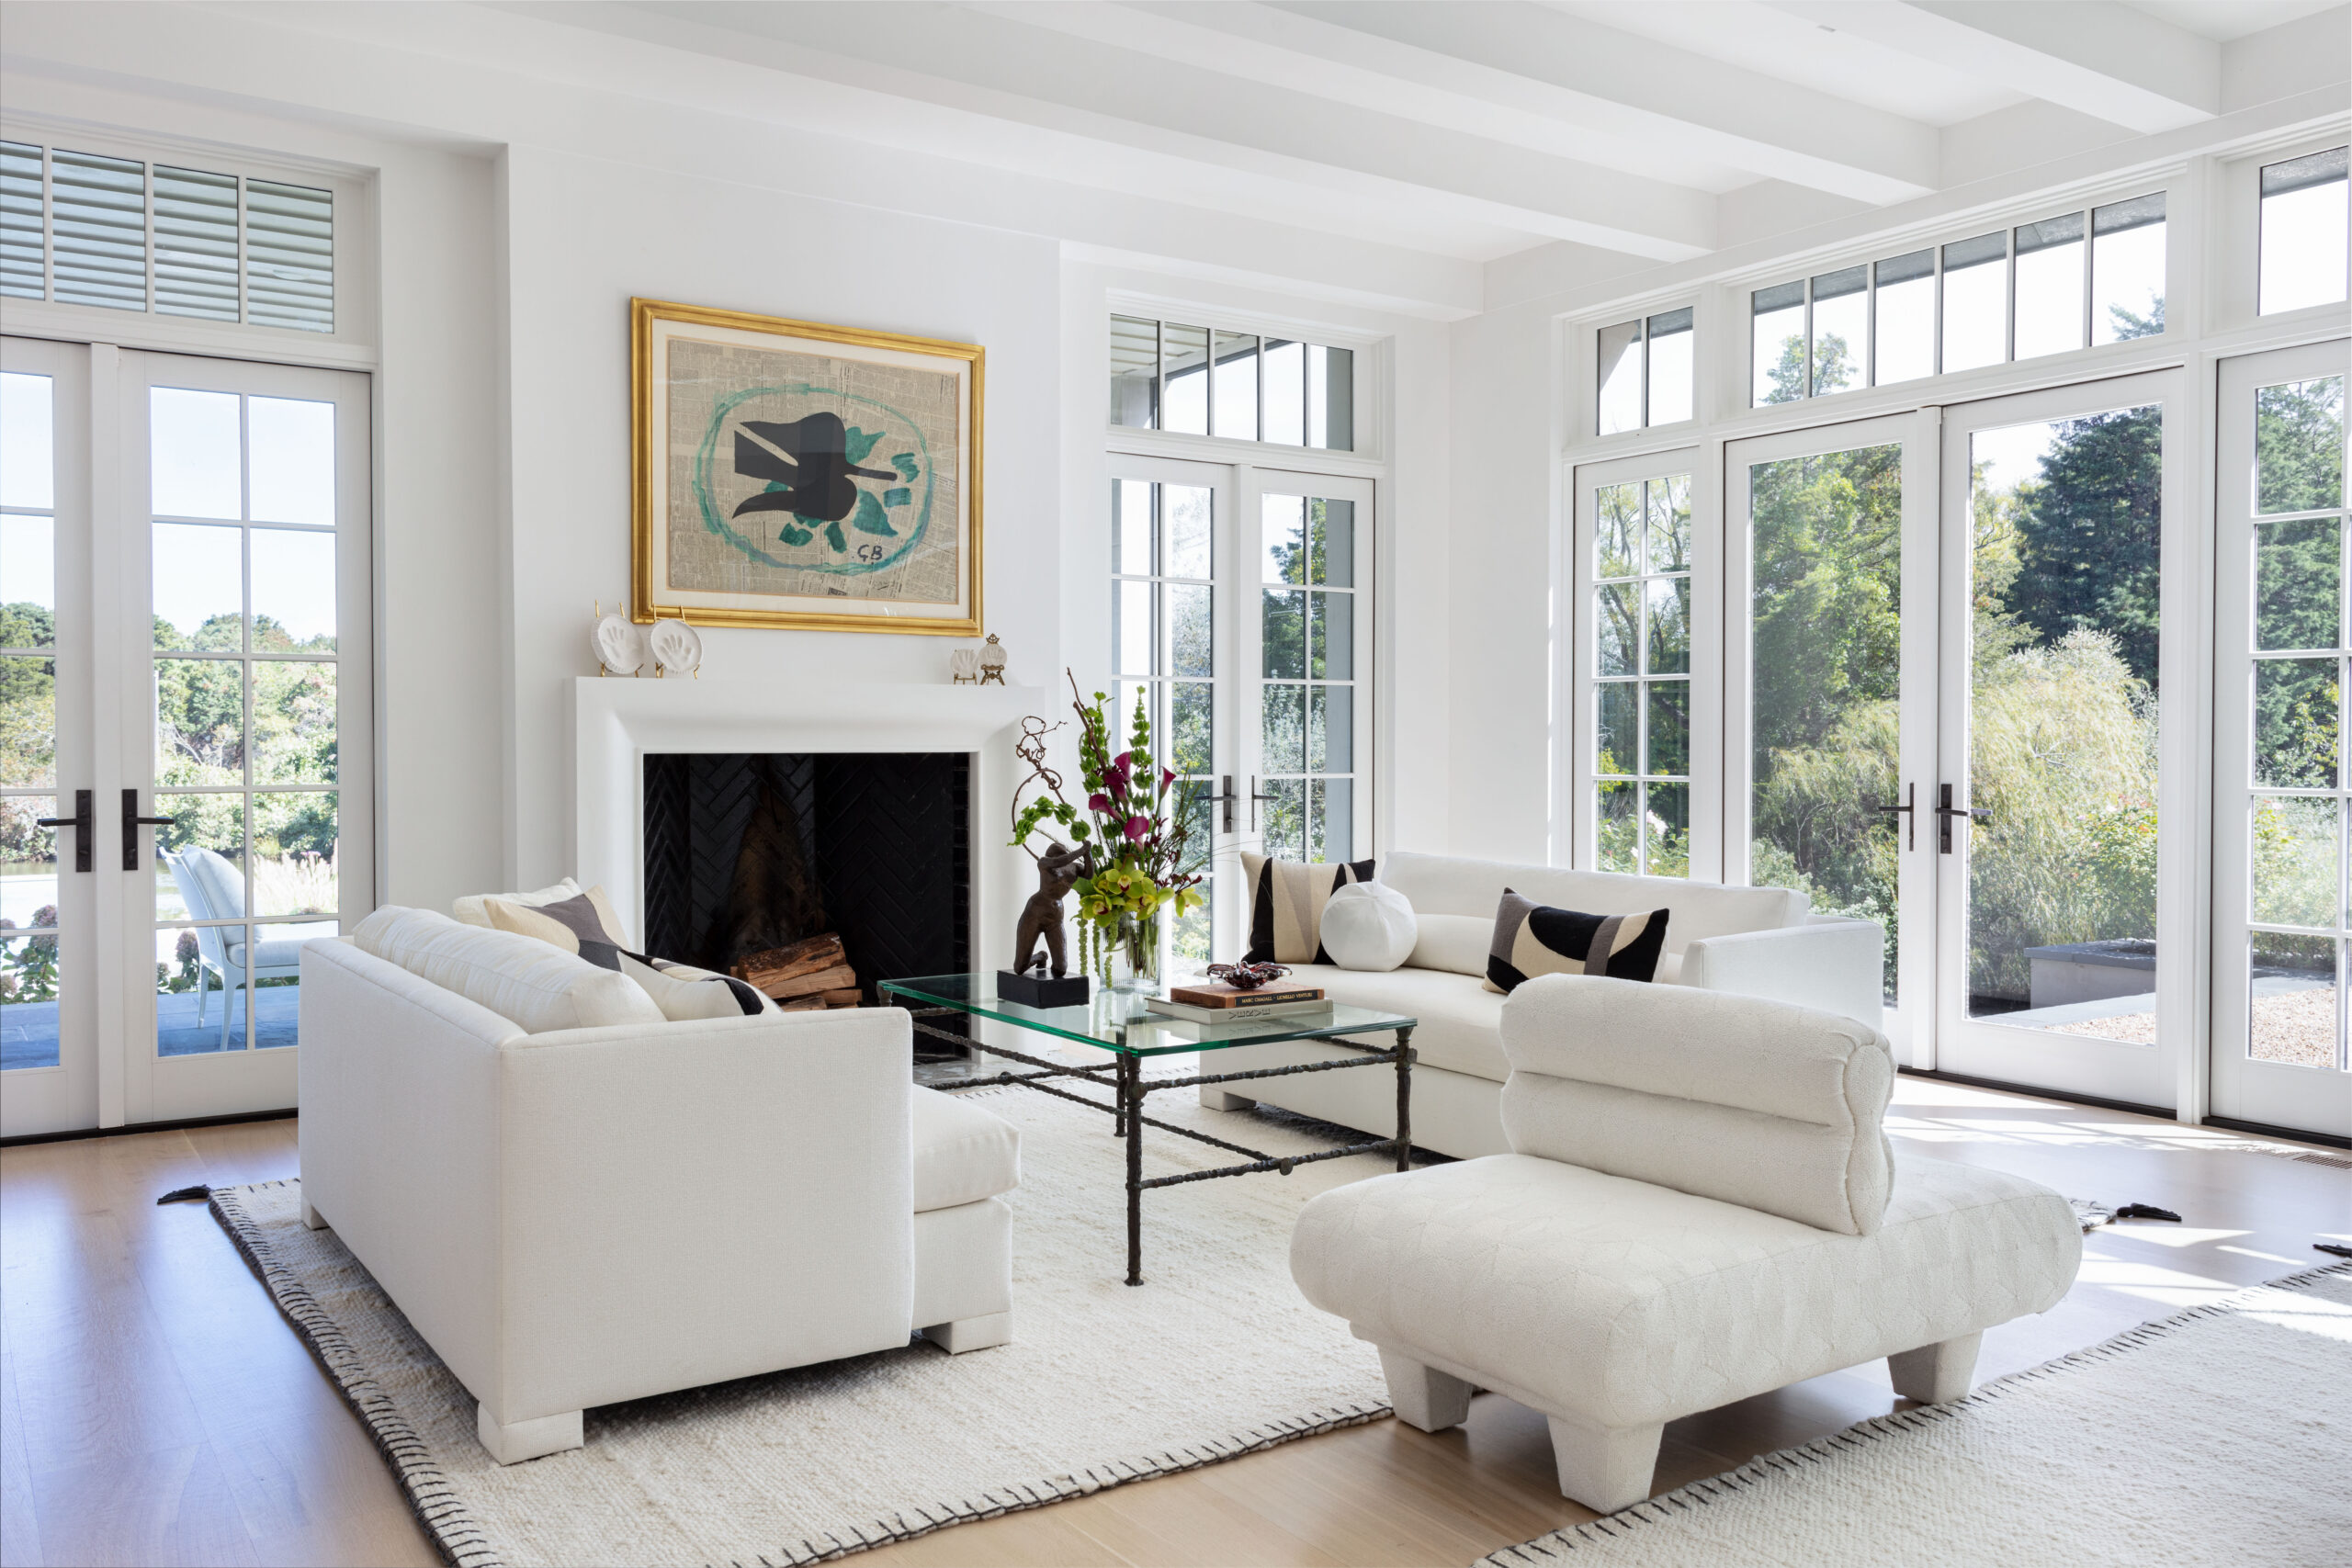 The great room of Chester and Christy Murray's Quogue home. COURTESY AUSTIN PATTERSON DISSTON